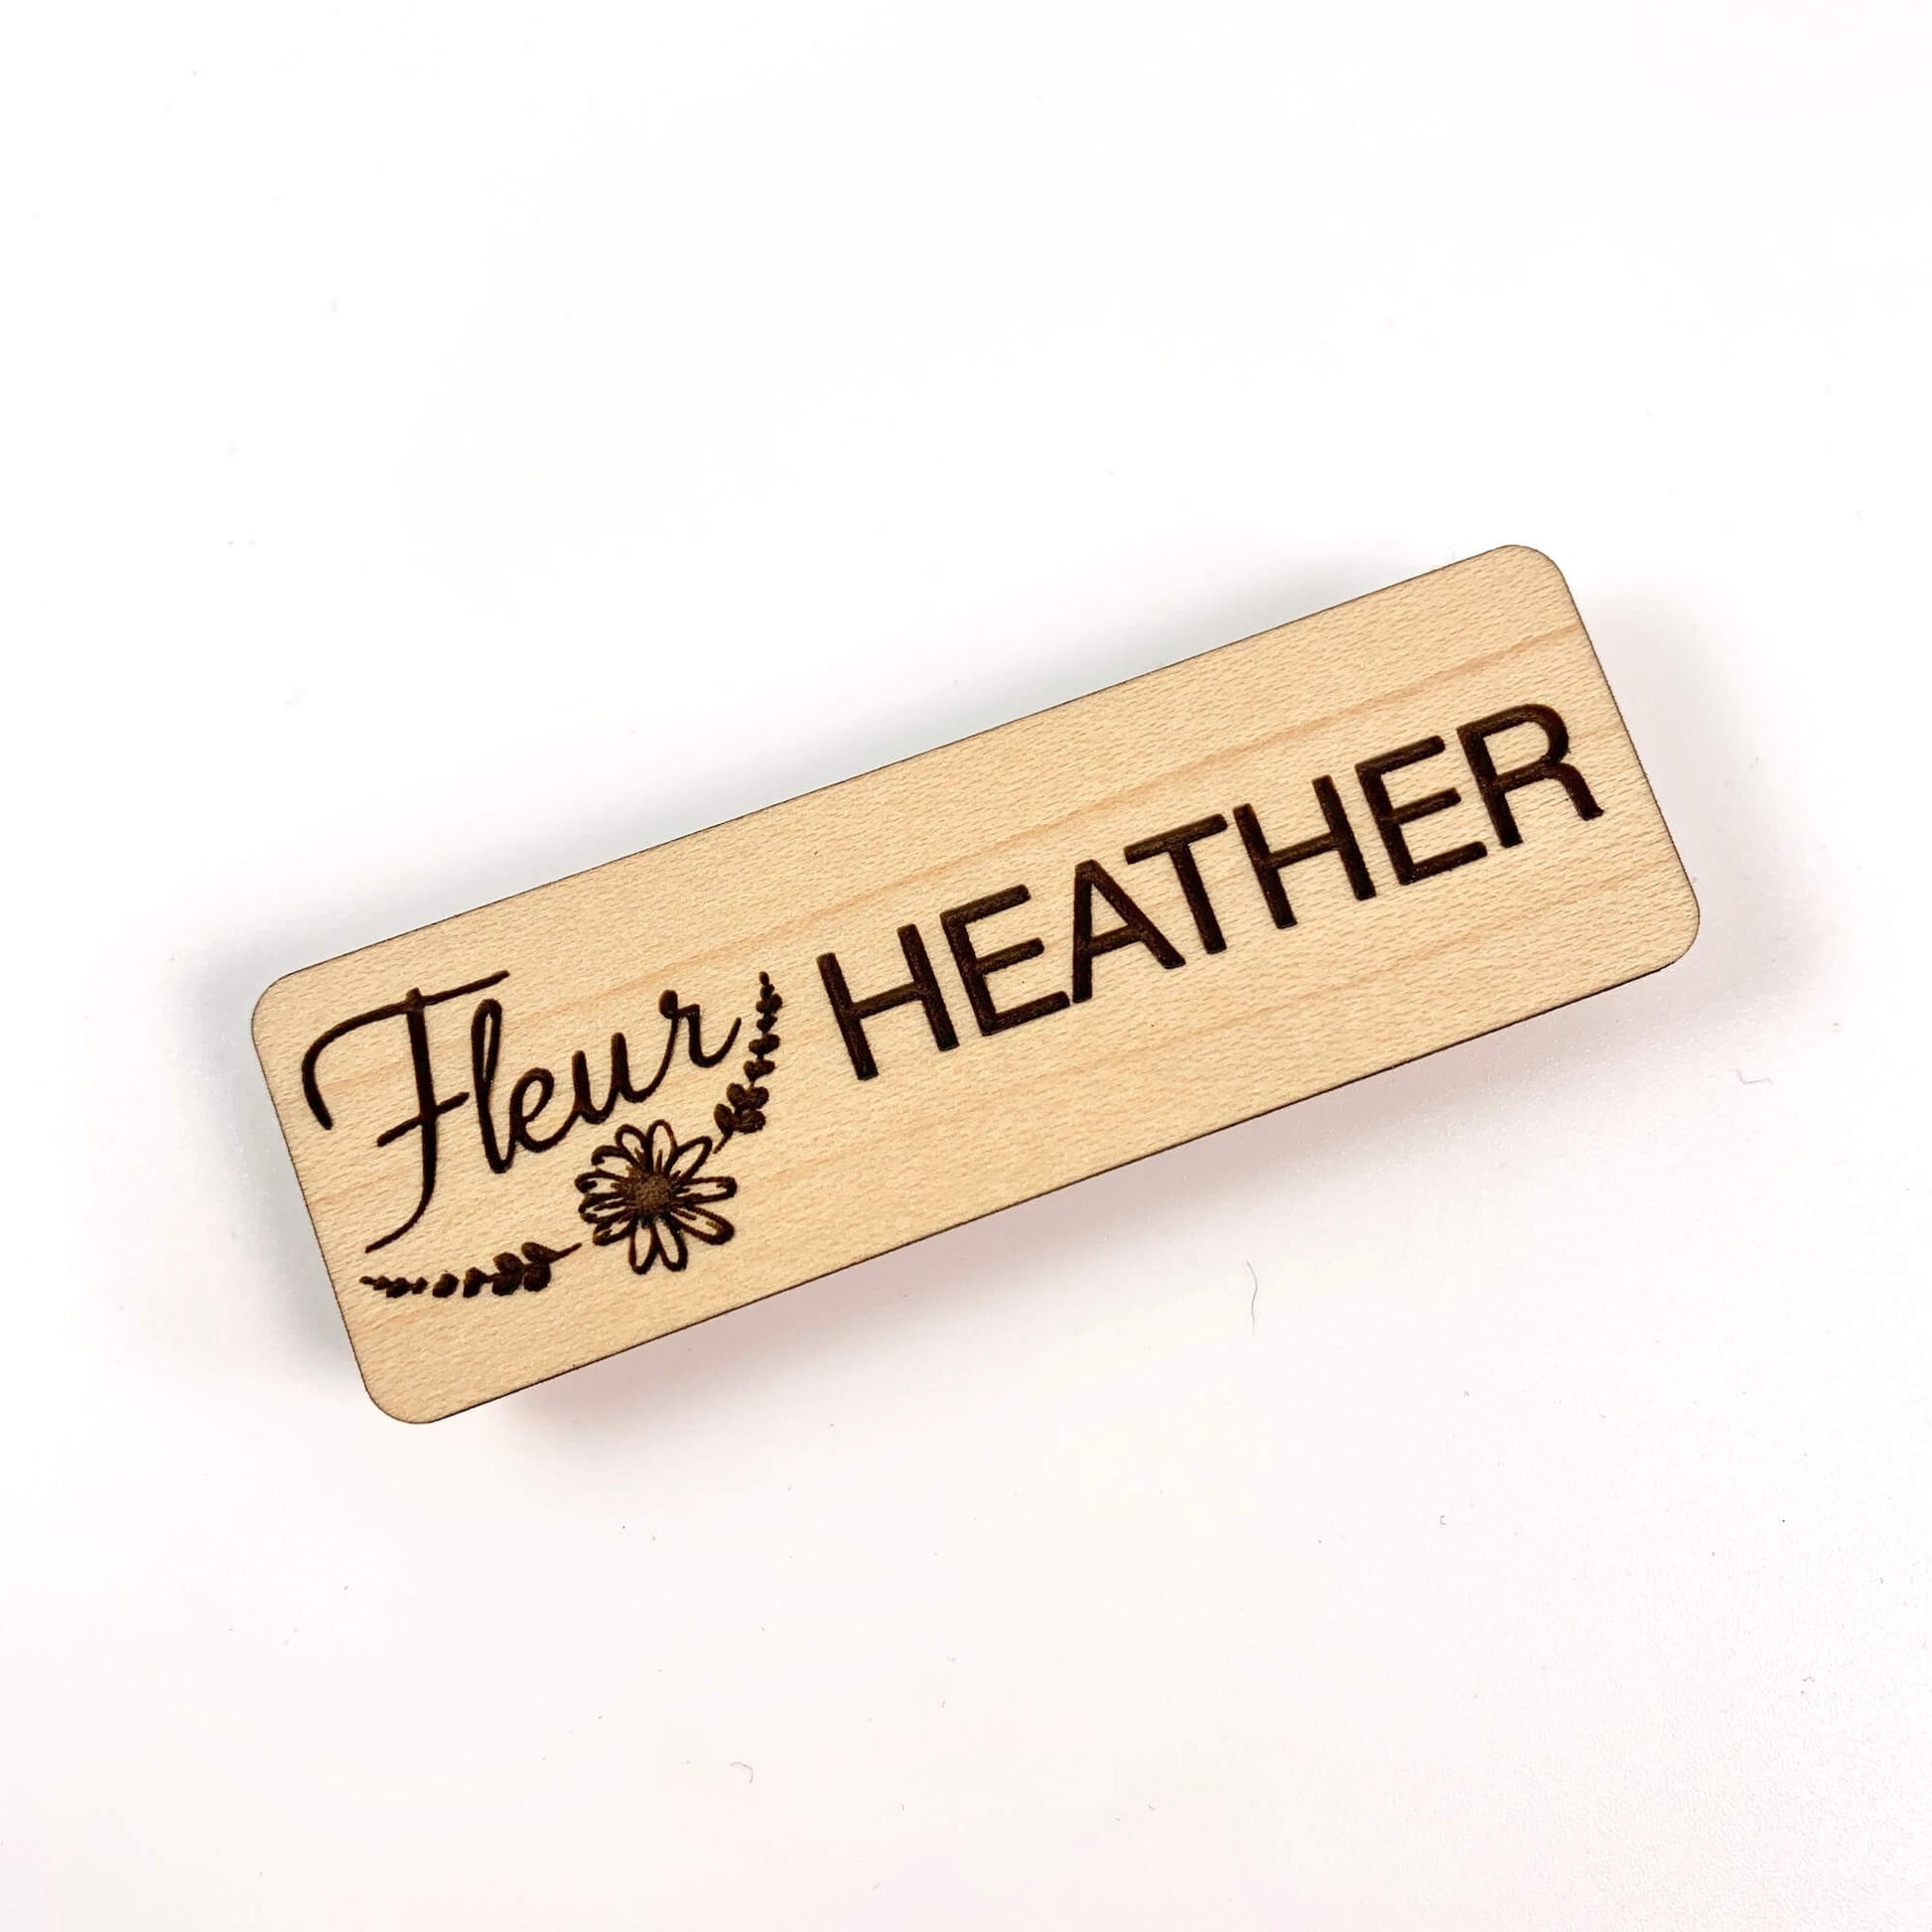 Custom Magnetic Name Tags - Laser cut and laser engraved maple wood by LeeMo Designs in Bend, Oregon